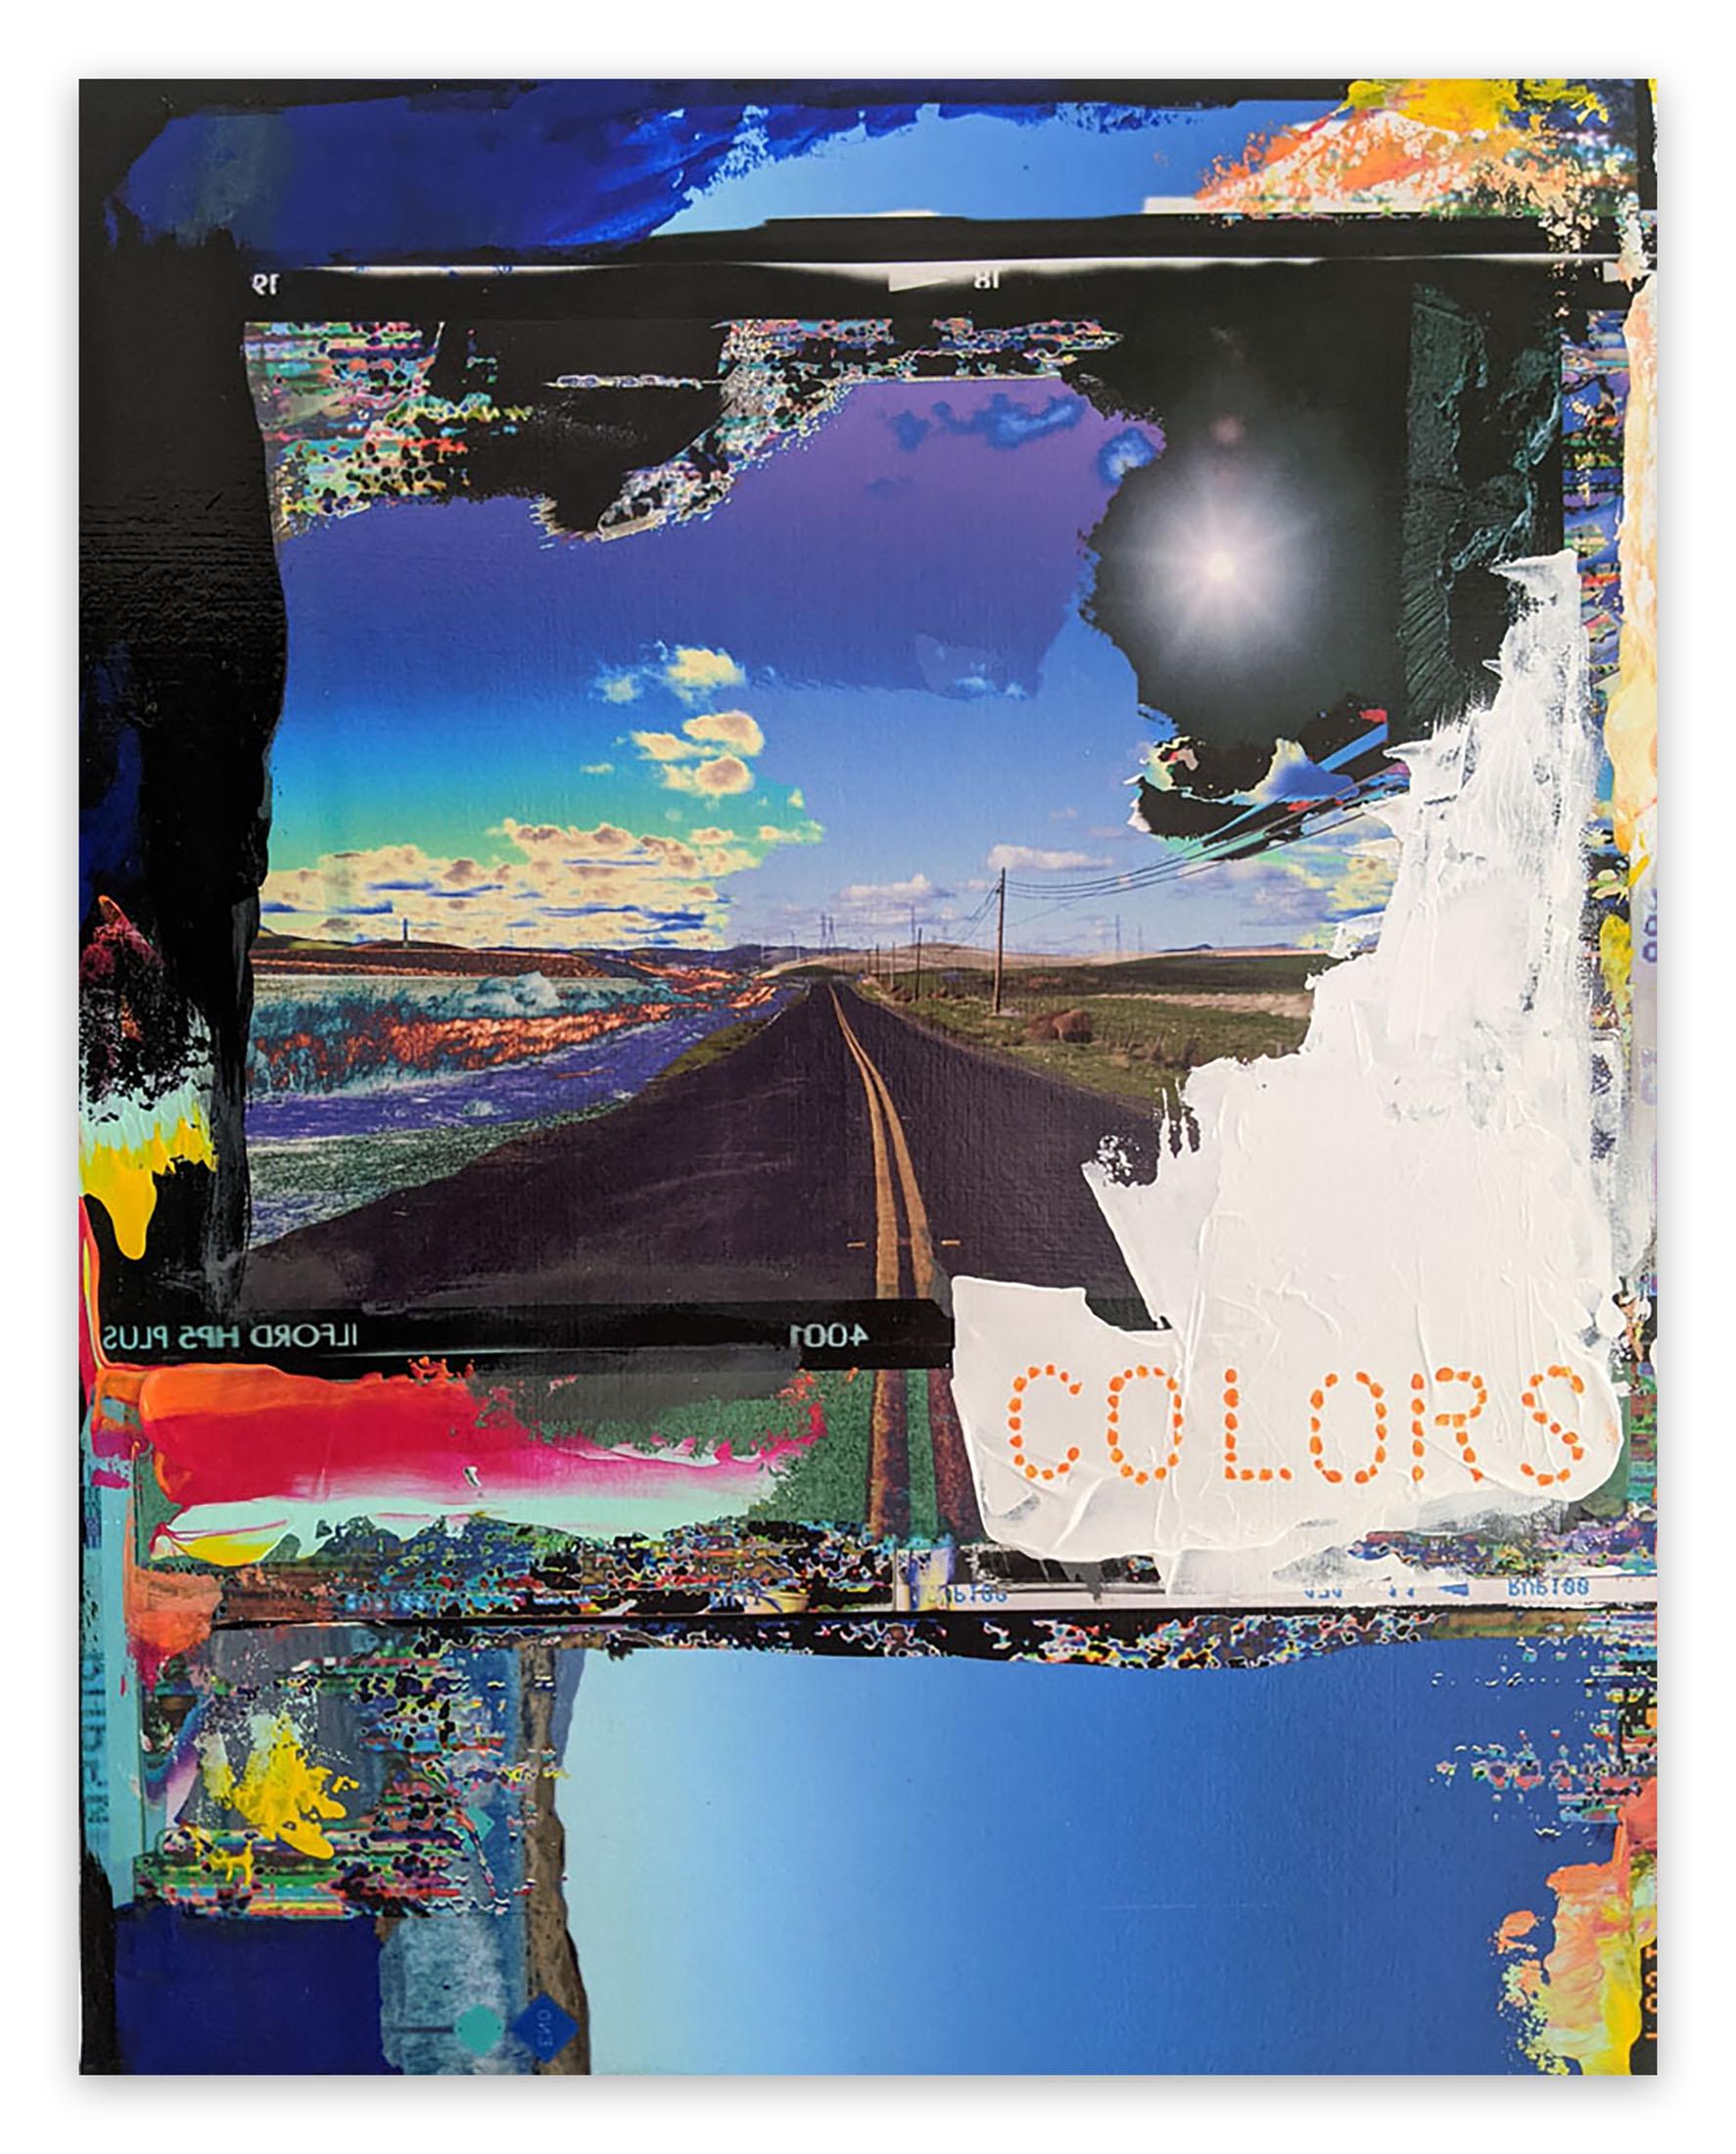 Colors (Abstract Photography)

Photography/painting, mixed media - Unframed.

Artwork exclusive to IdeelArt.

Artworks are of the highest archival standards. Wood supports are sealed with two coats of Golden acrylic gel medium.
Photographs are